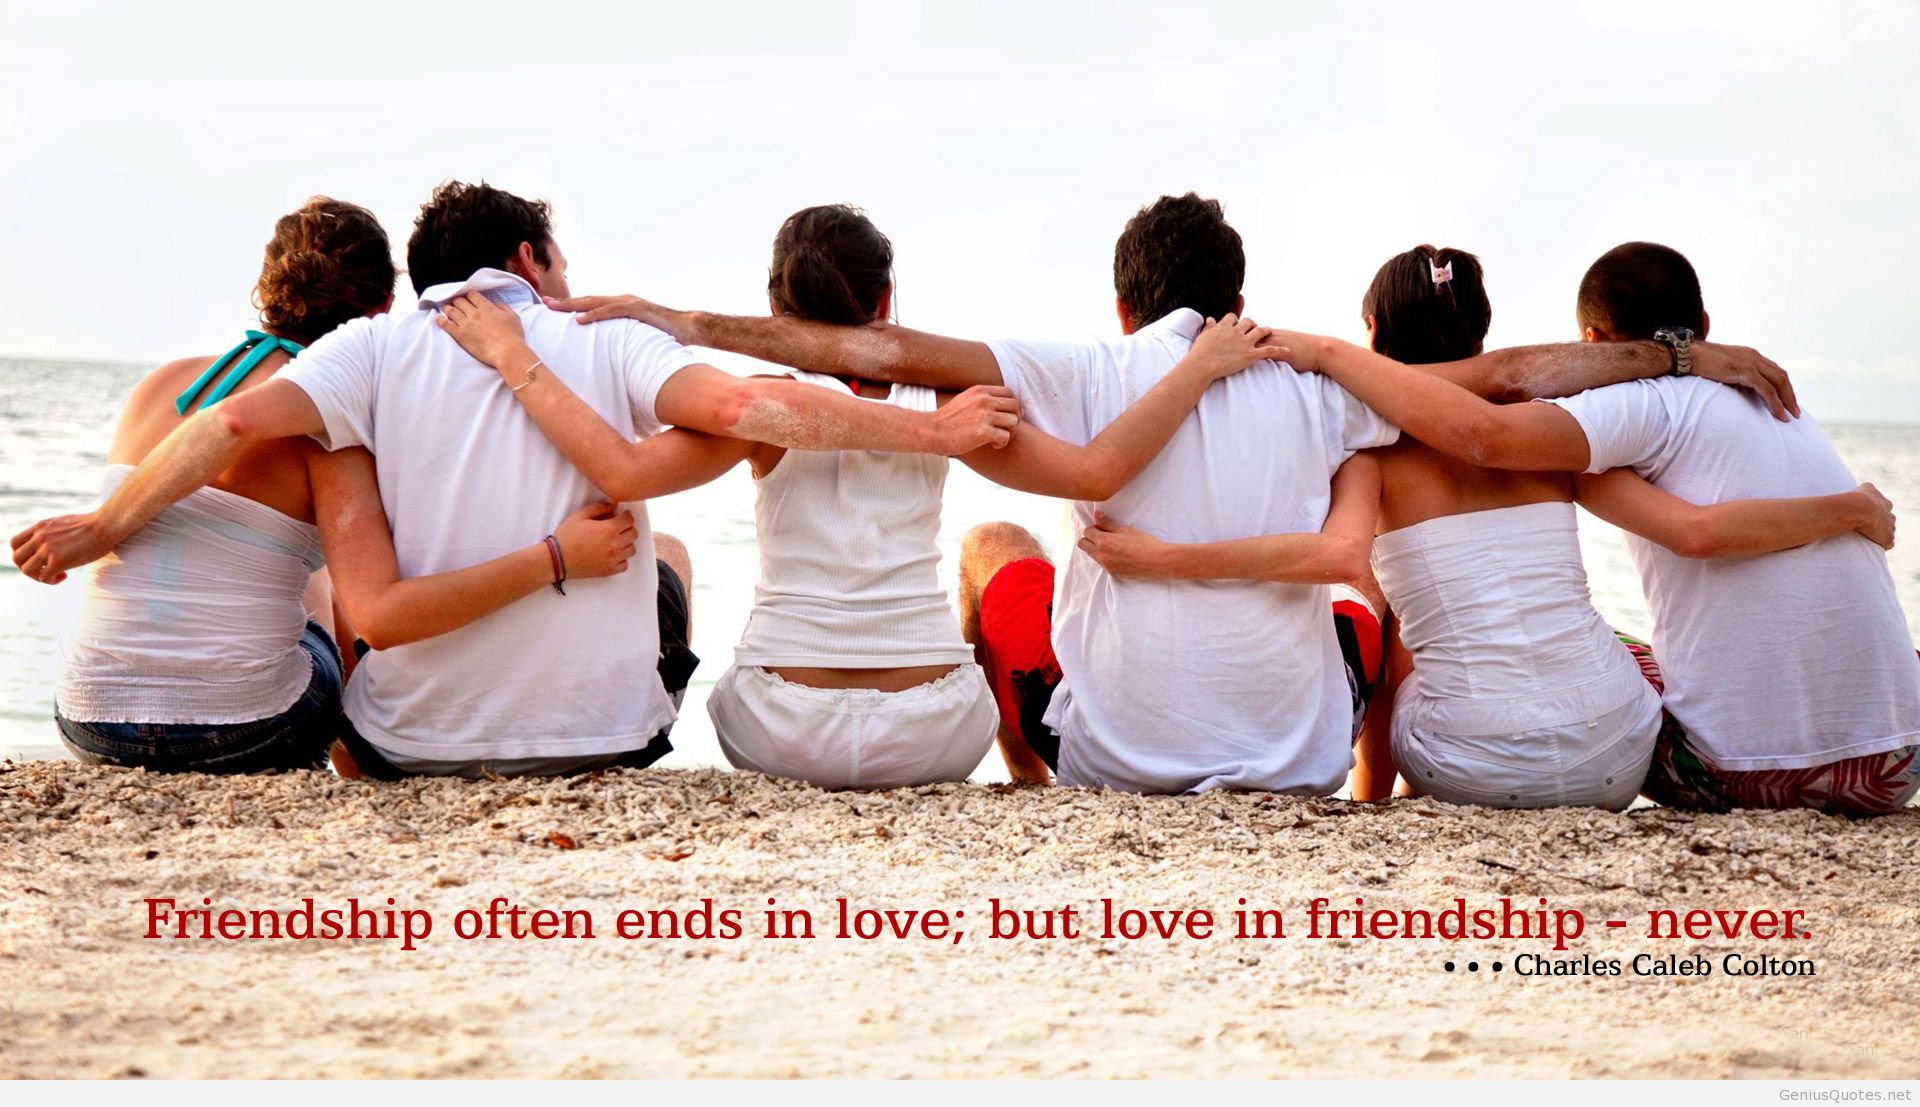 Best Friends Forever Wallpapers Hd - Friendship Day Boys And Girls , HD Wallpaper & Backgrounds